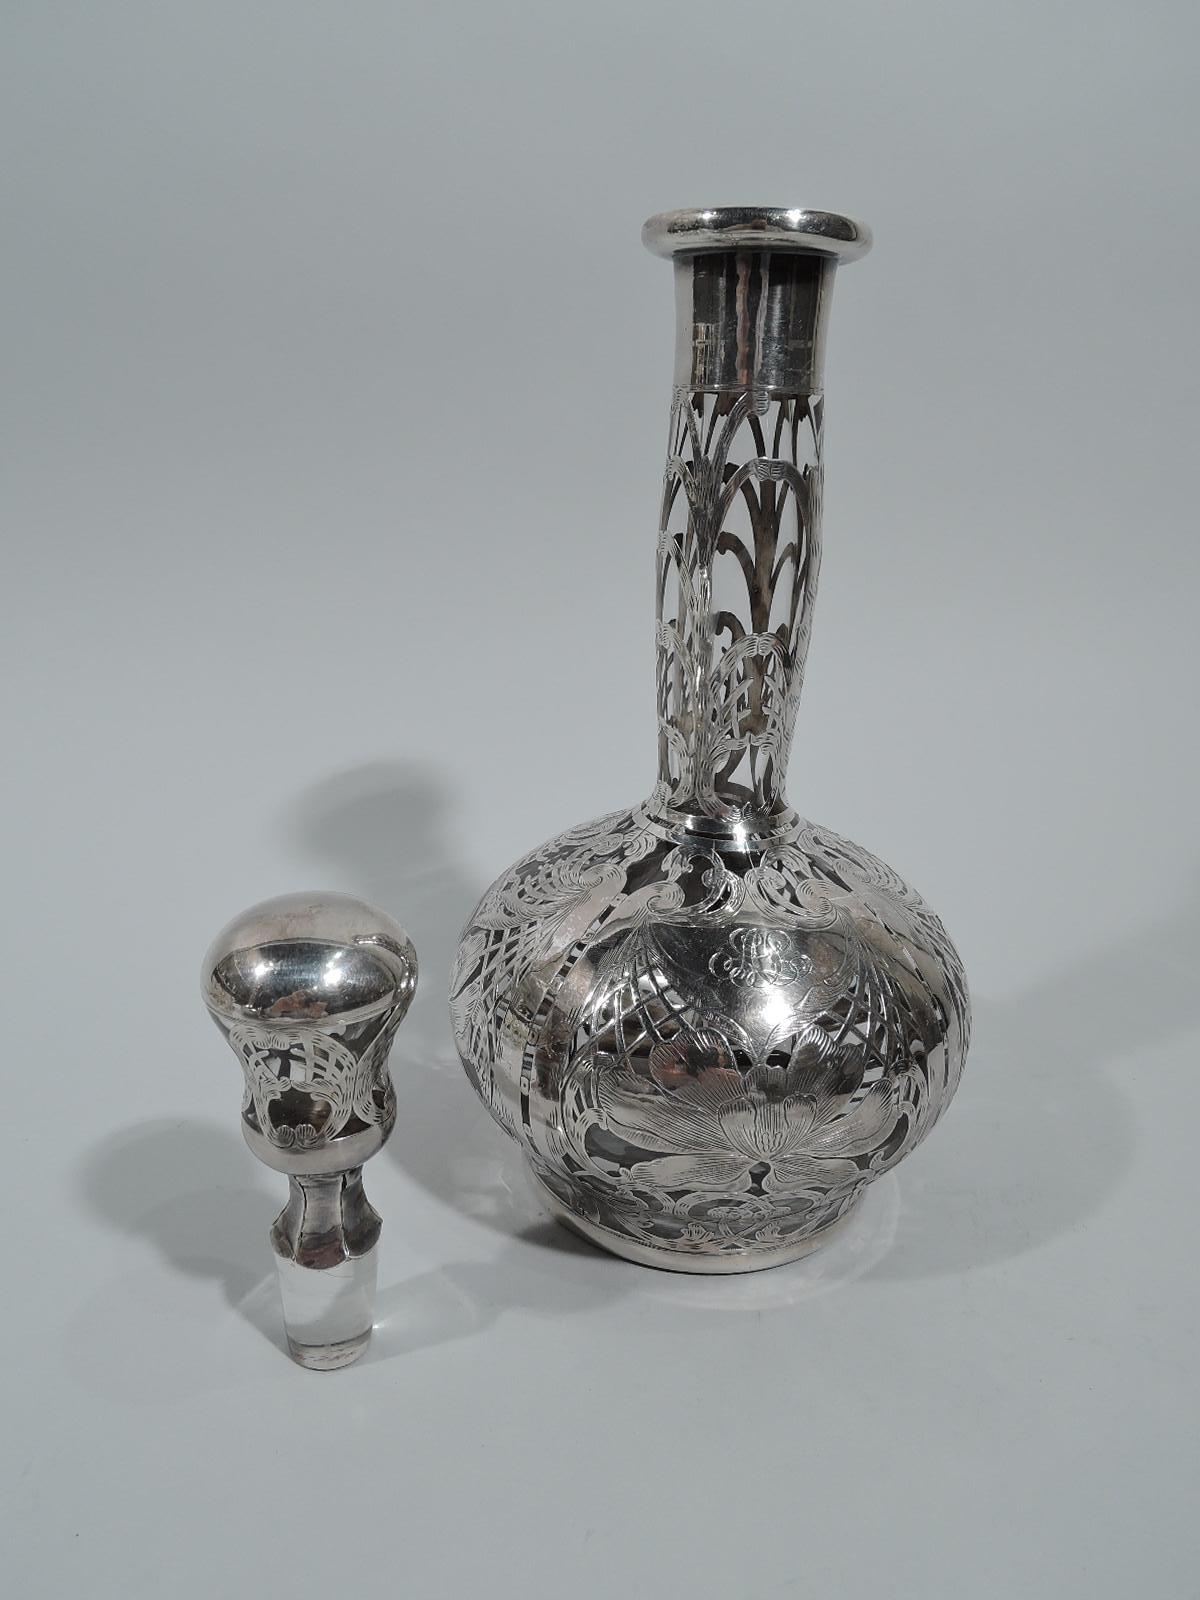 Tall Antique American Art Nouveau Silver Overlay Decanter In Excellent Condition For Sale In New York, NY